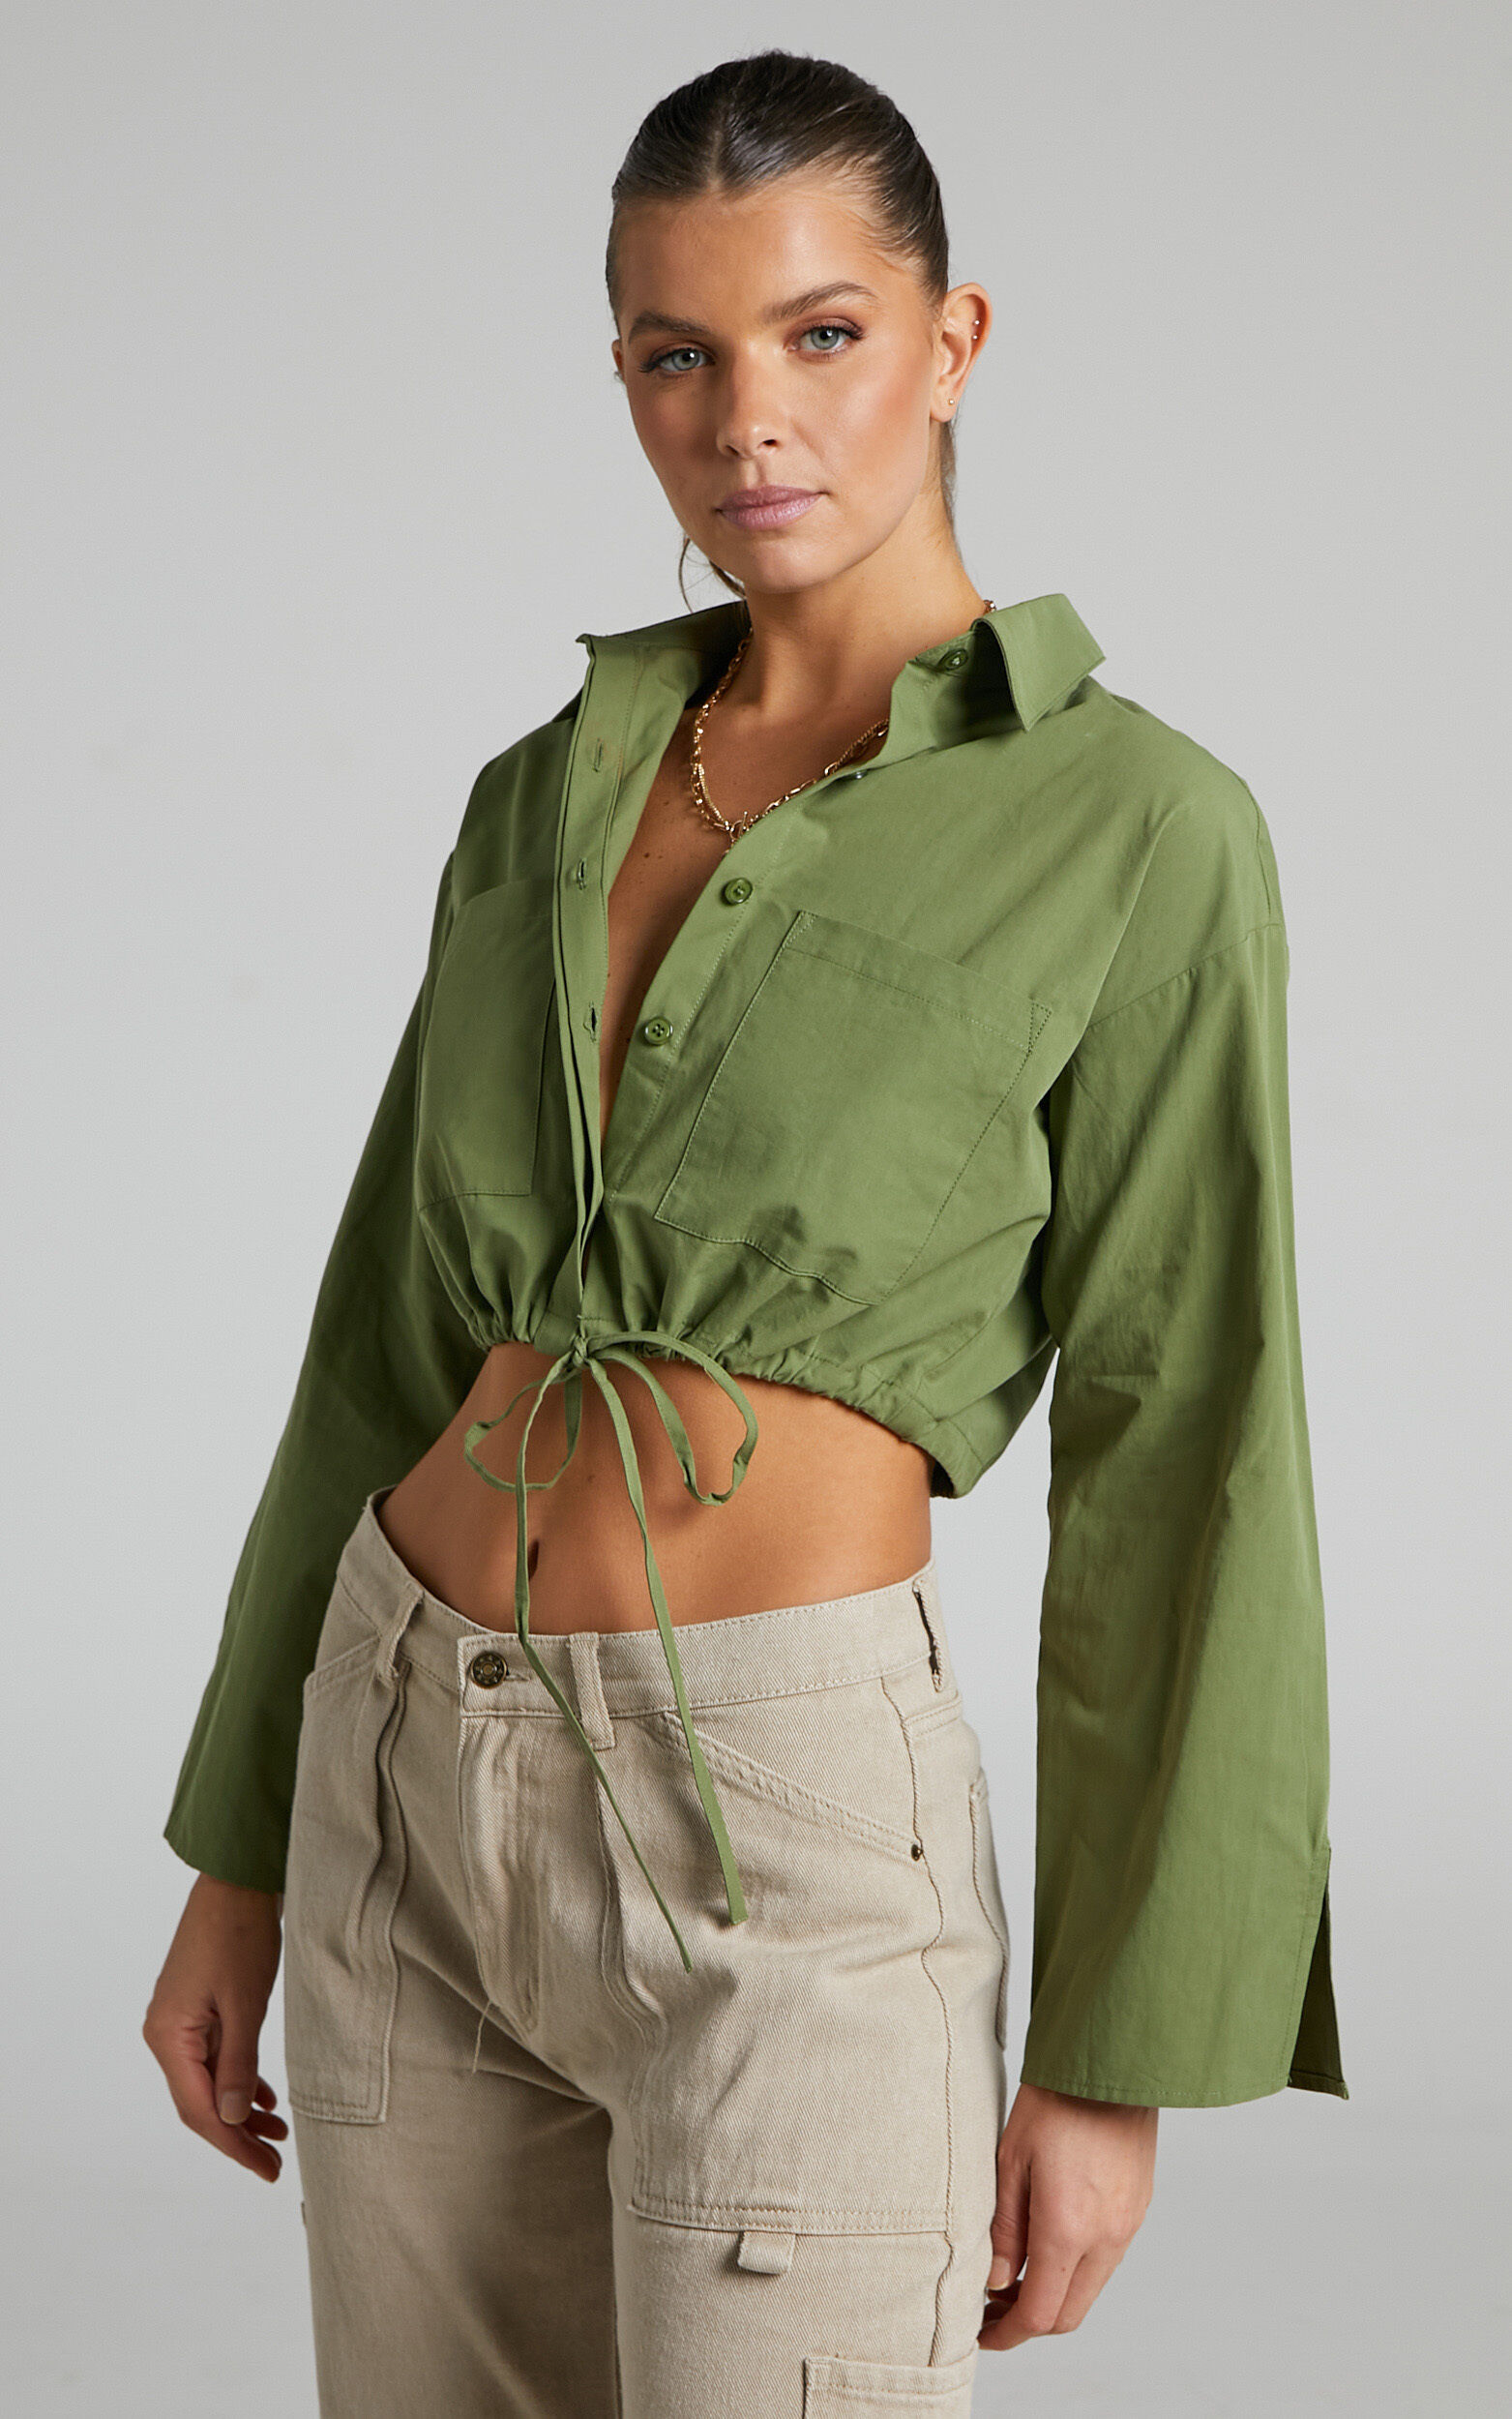 Lynessa Long Sleeve Cropped Drawstring Shirt in Khaki - 06, GRN1, super-hi-res image number null